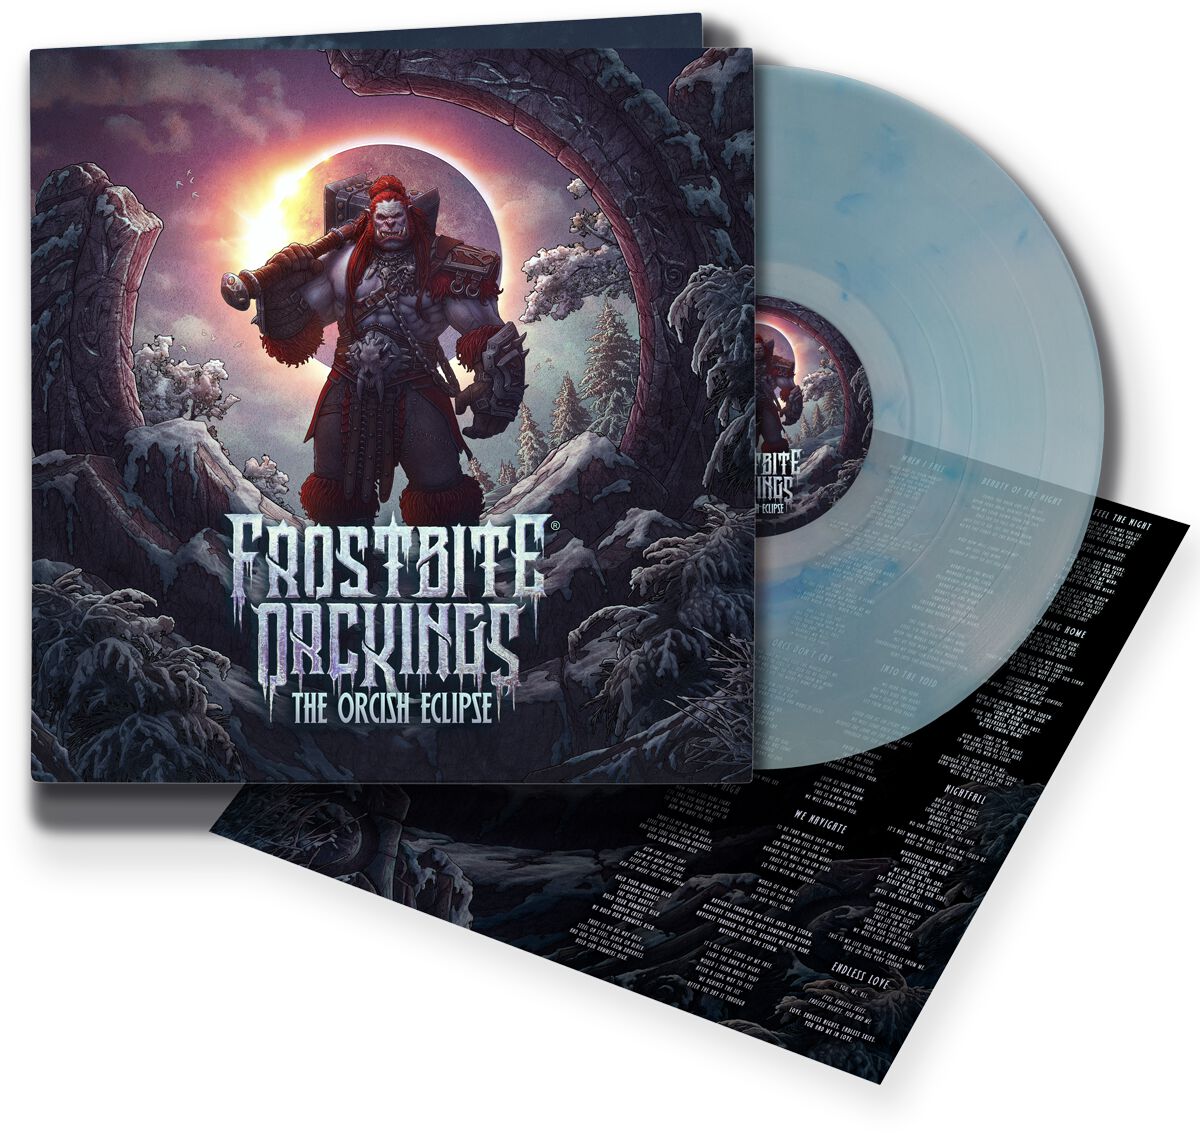 Frostbite Orckings The Orcish Eclipse LP multicolor